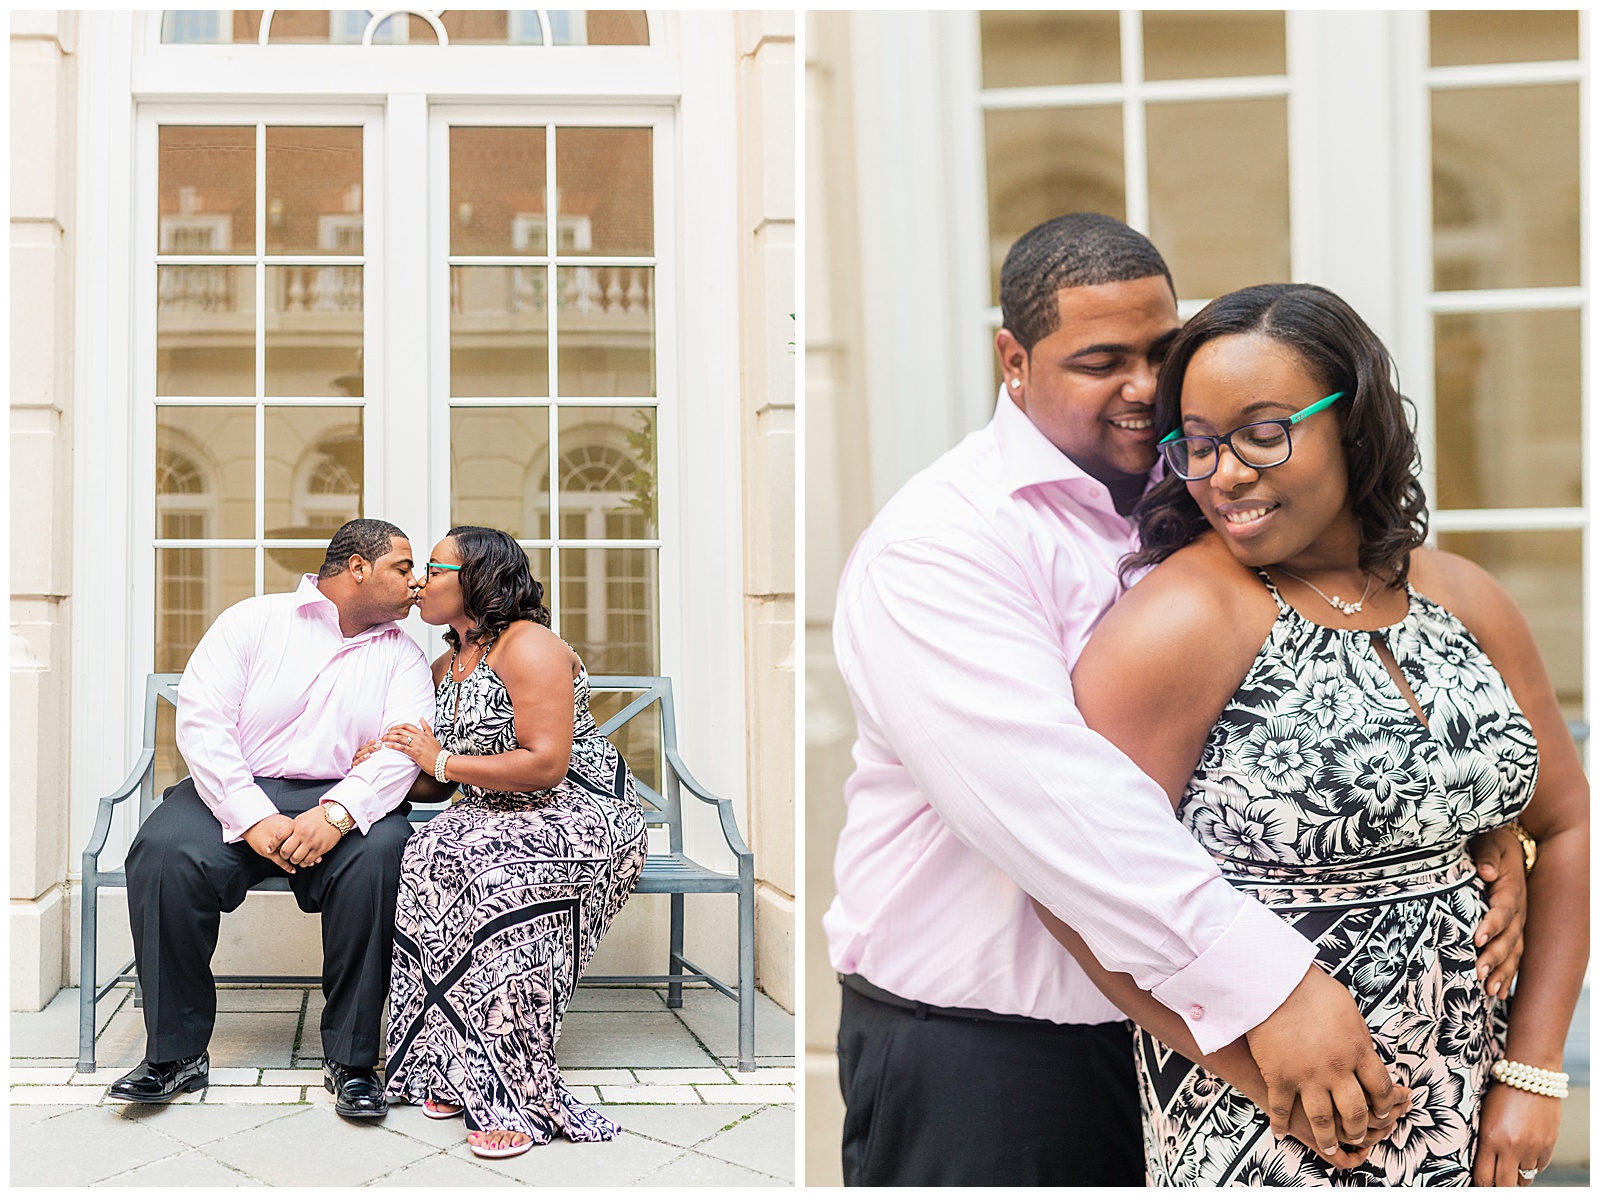 cnu-summer-engagement-session-charneice-kevin-5.jpg